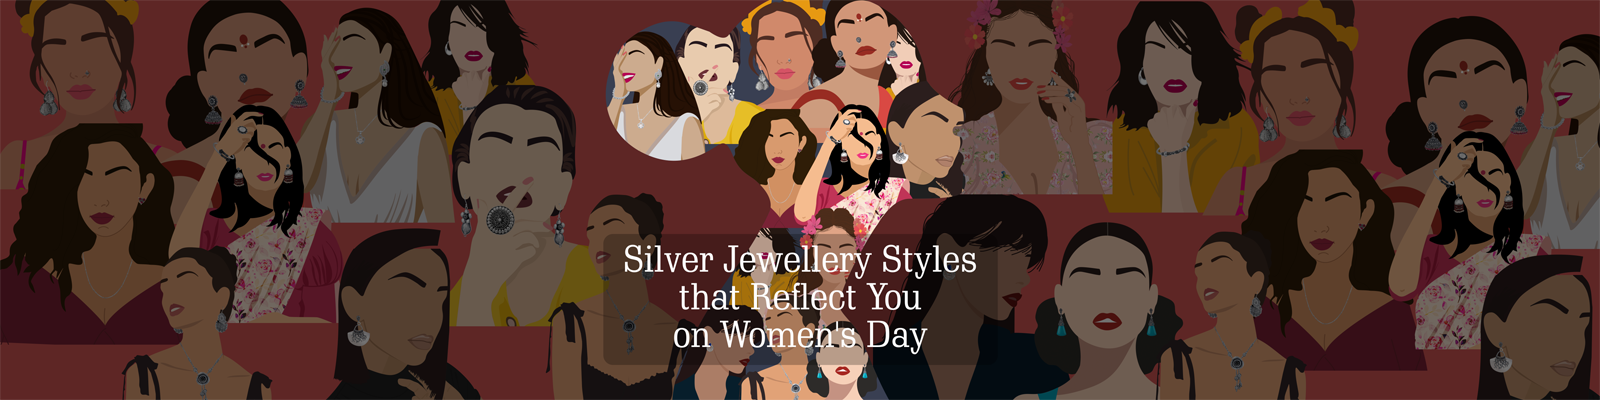 Silver Jewellery Styles that Reflect You on Women’s Day